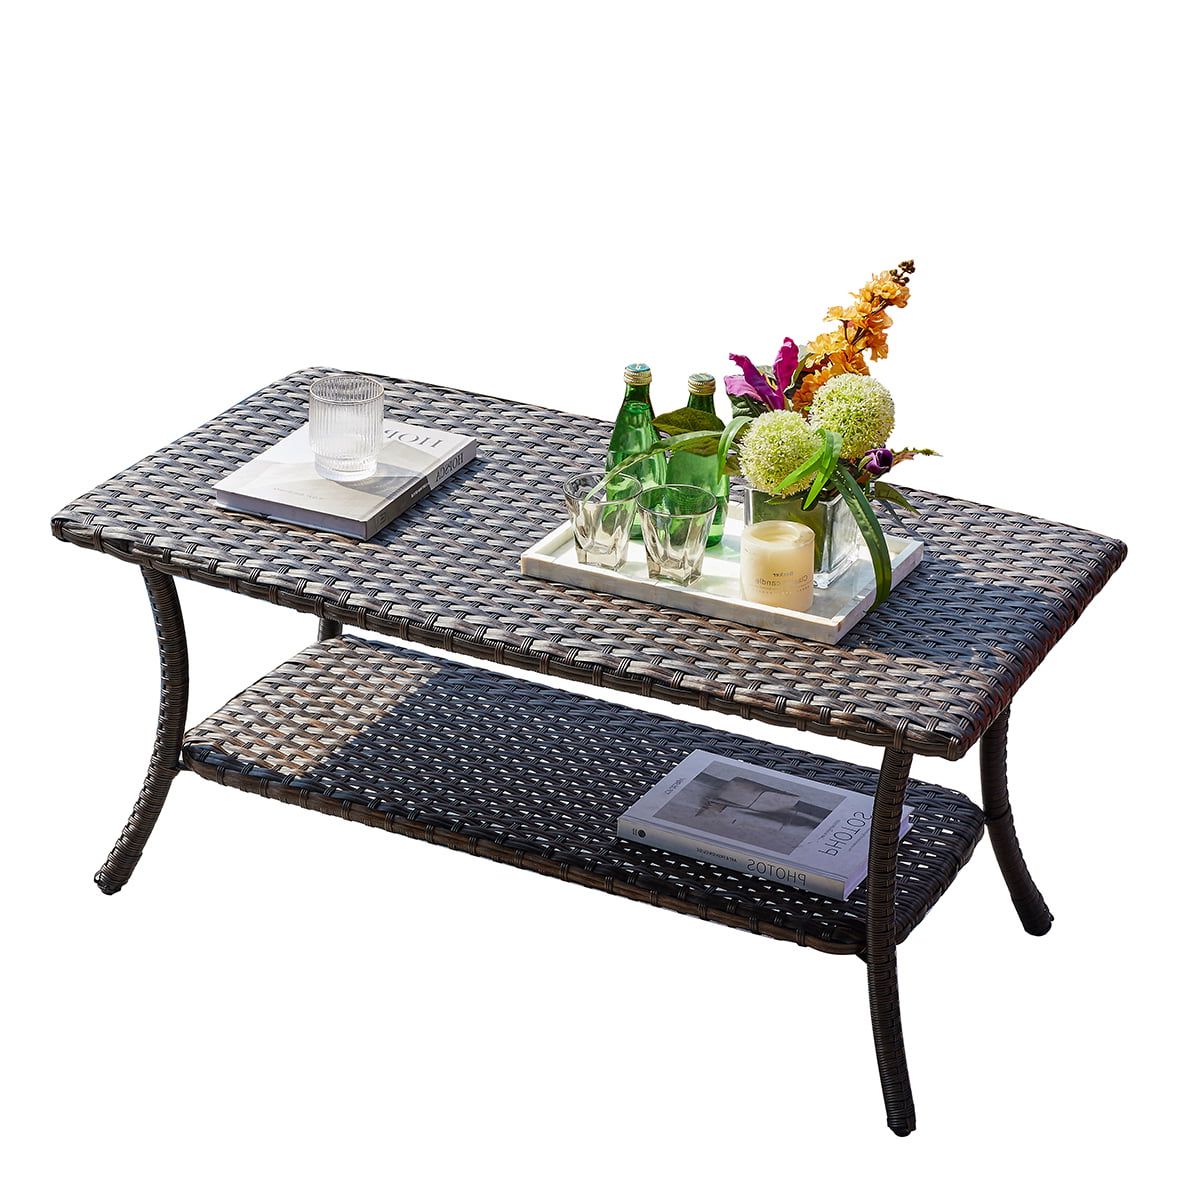 Outdoor 2 Tiers Storage Metal Coffee Tables Regarding Well Liked Parkwell Outdoor Wicker Rectangular Coffee Table With 2 Tier Storage Shelf  And Wicker Table Top, Metal Frame – Walmart (View 7 of 15)